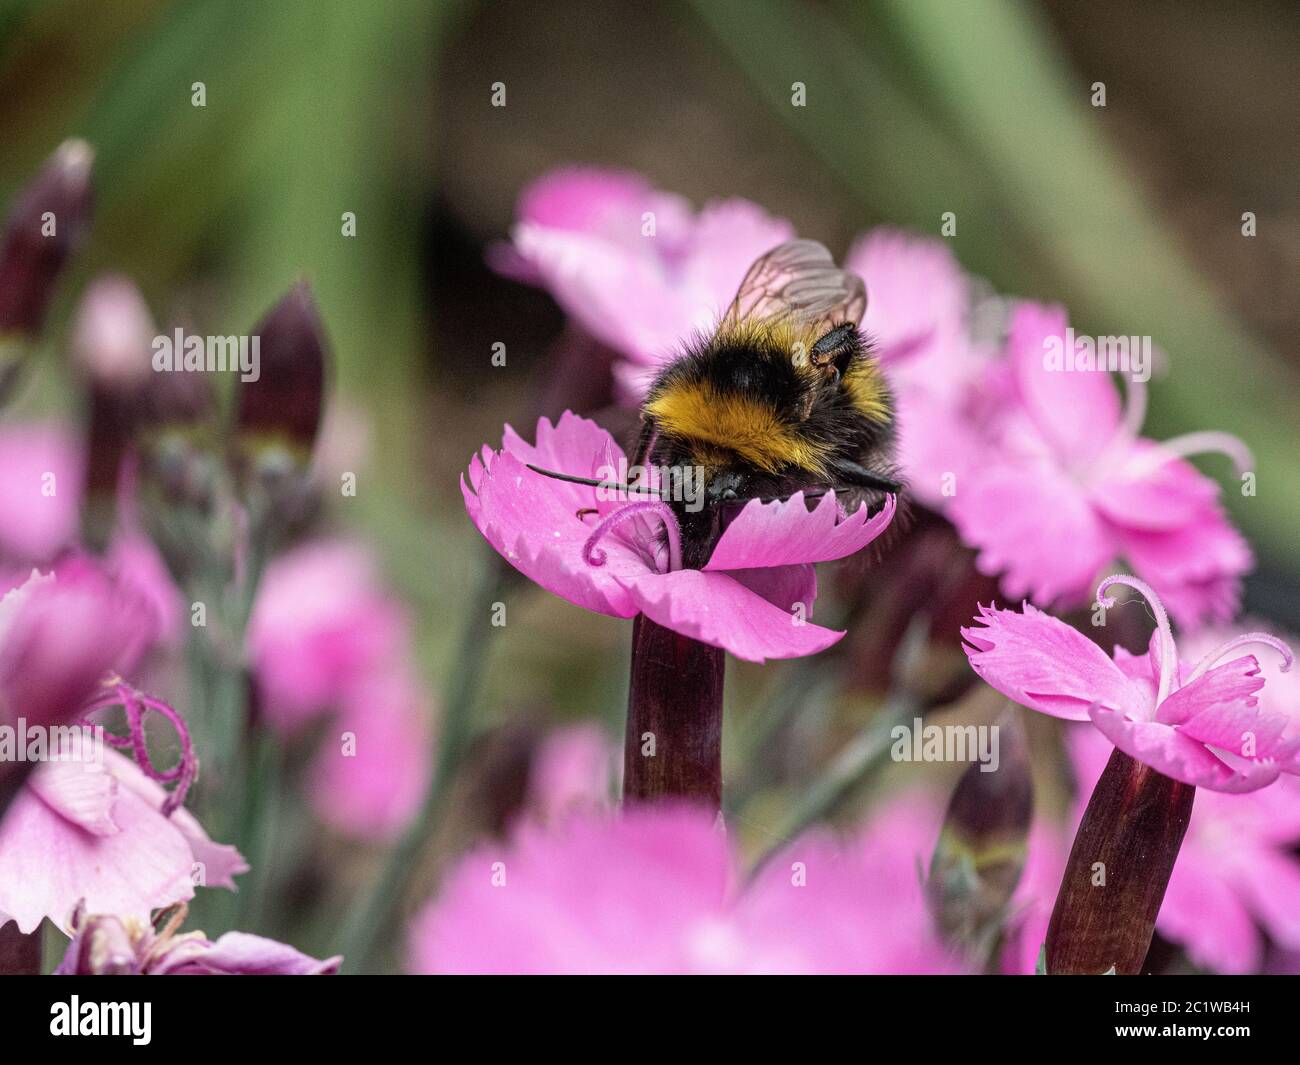 A close up of a bumble bee feeding on the pink flower of Dianthus Dinetta Stock Photo